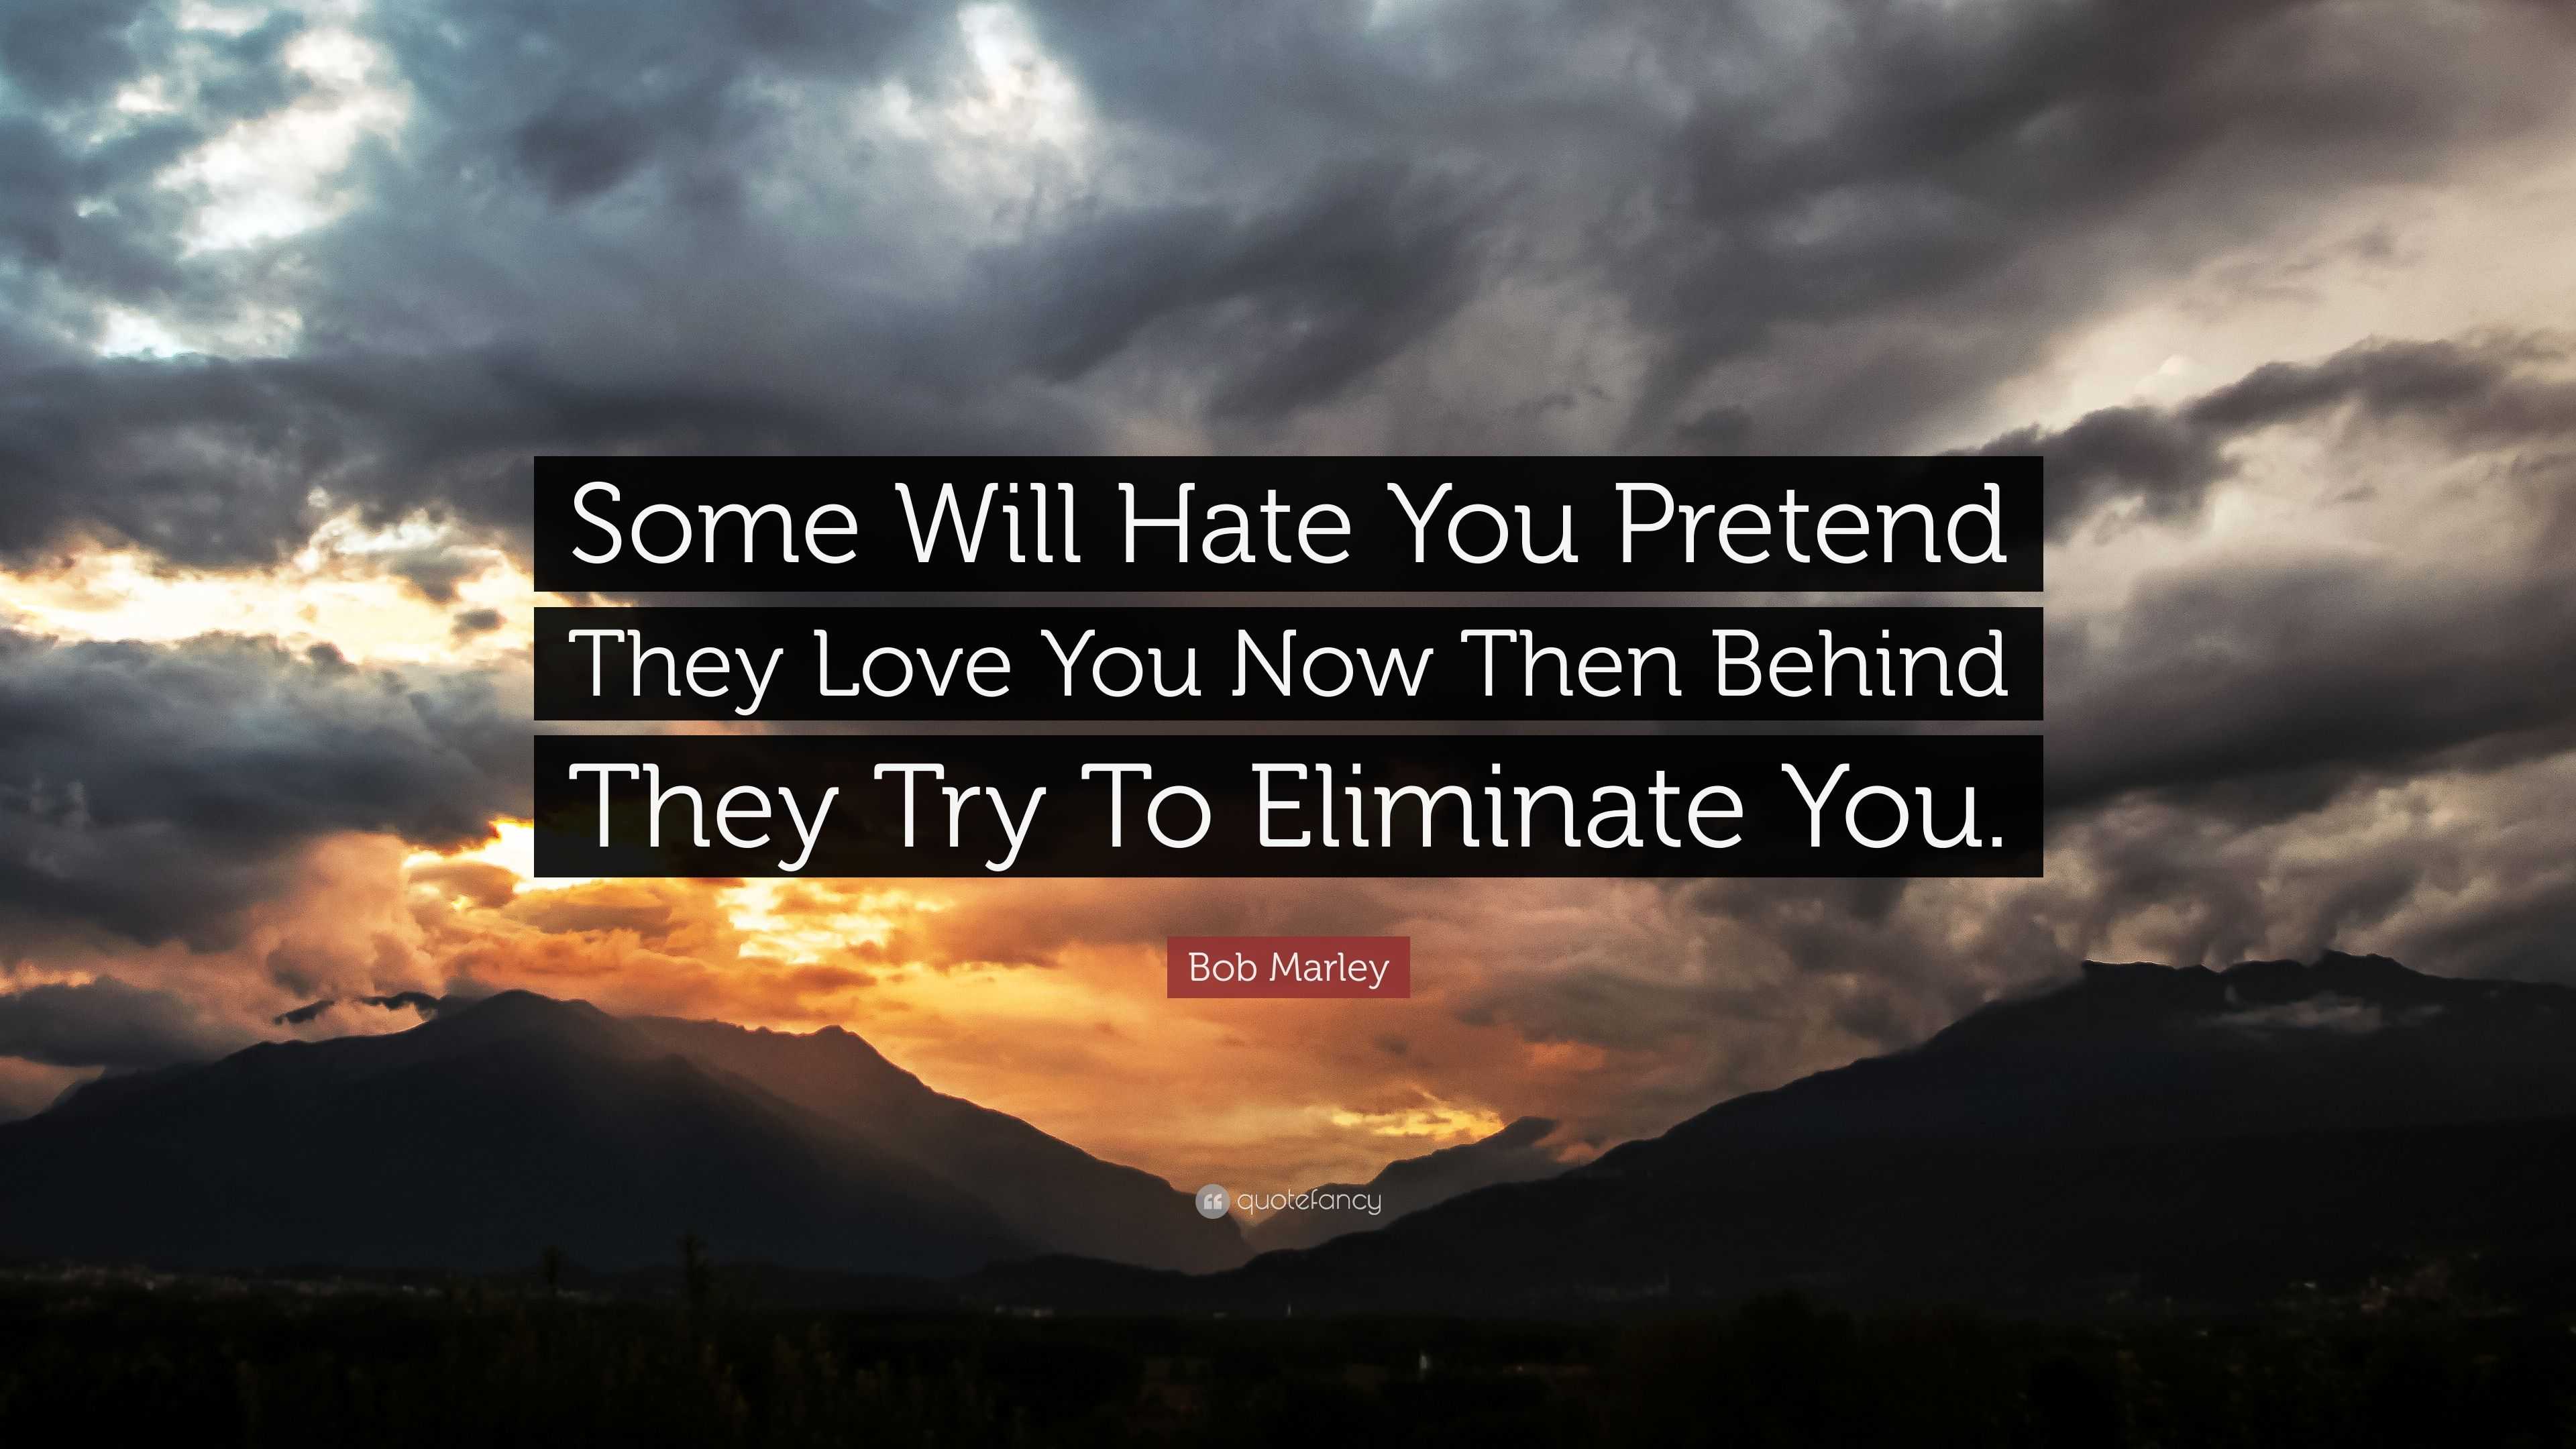 Bob Marley Quote “Some Will Hate You Pretend They Love You Now Then Behind